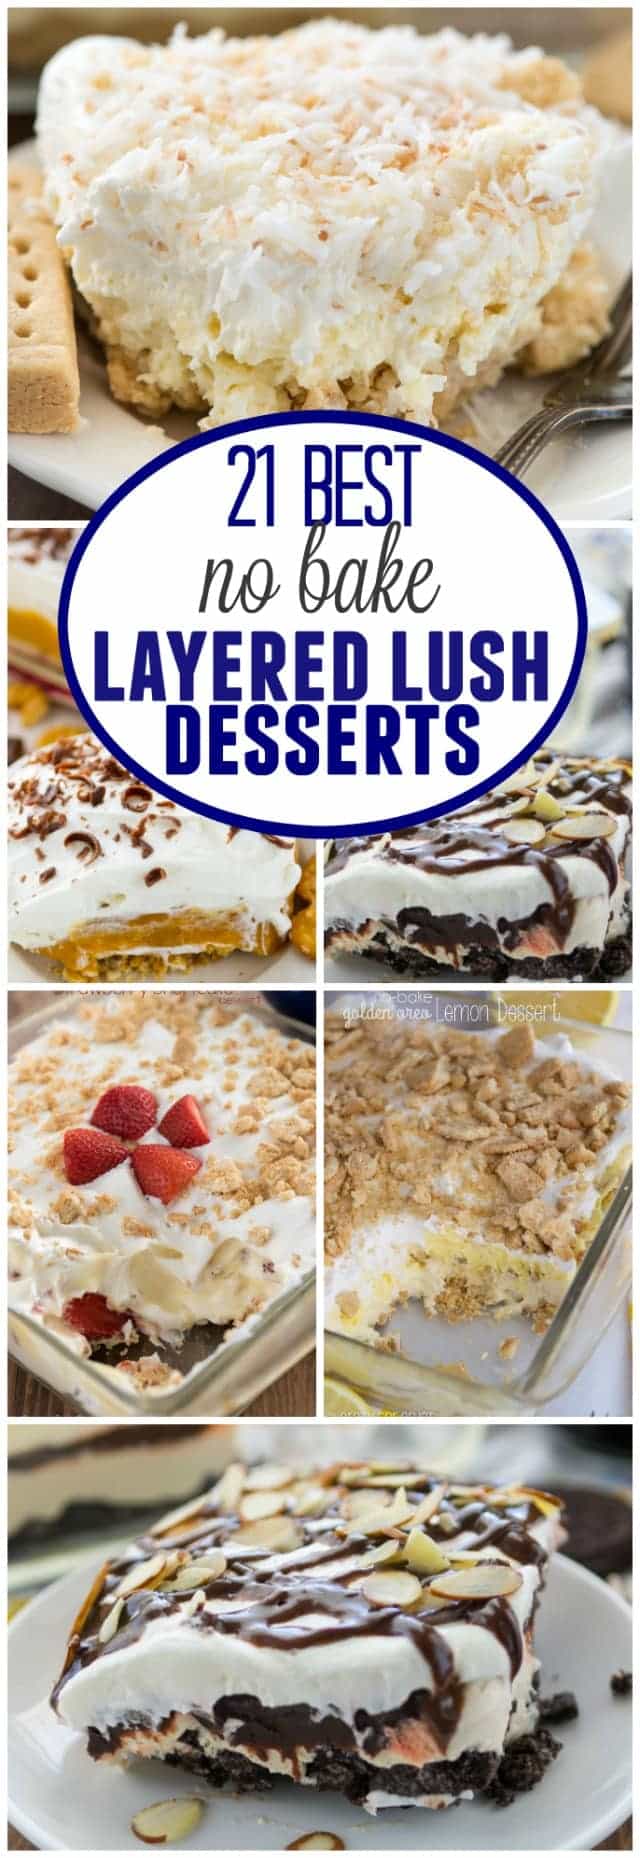 21 Best No Bake Layered Lush Desserts - if you love easy recipes, these are for you! Everyone loves these lush dessert recipes at parties!